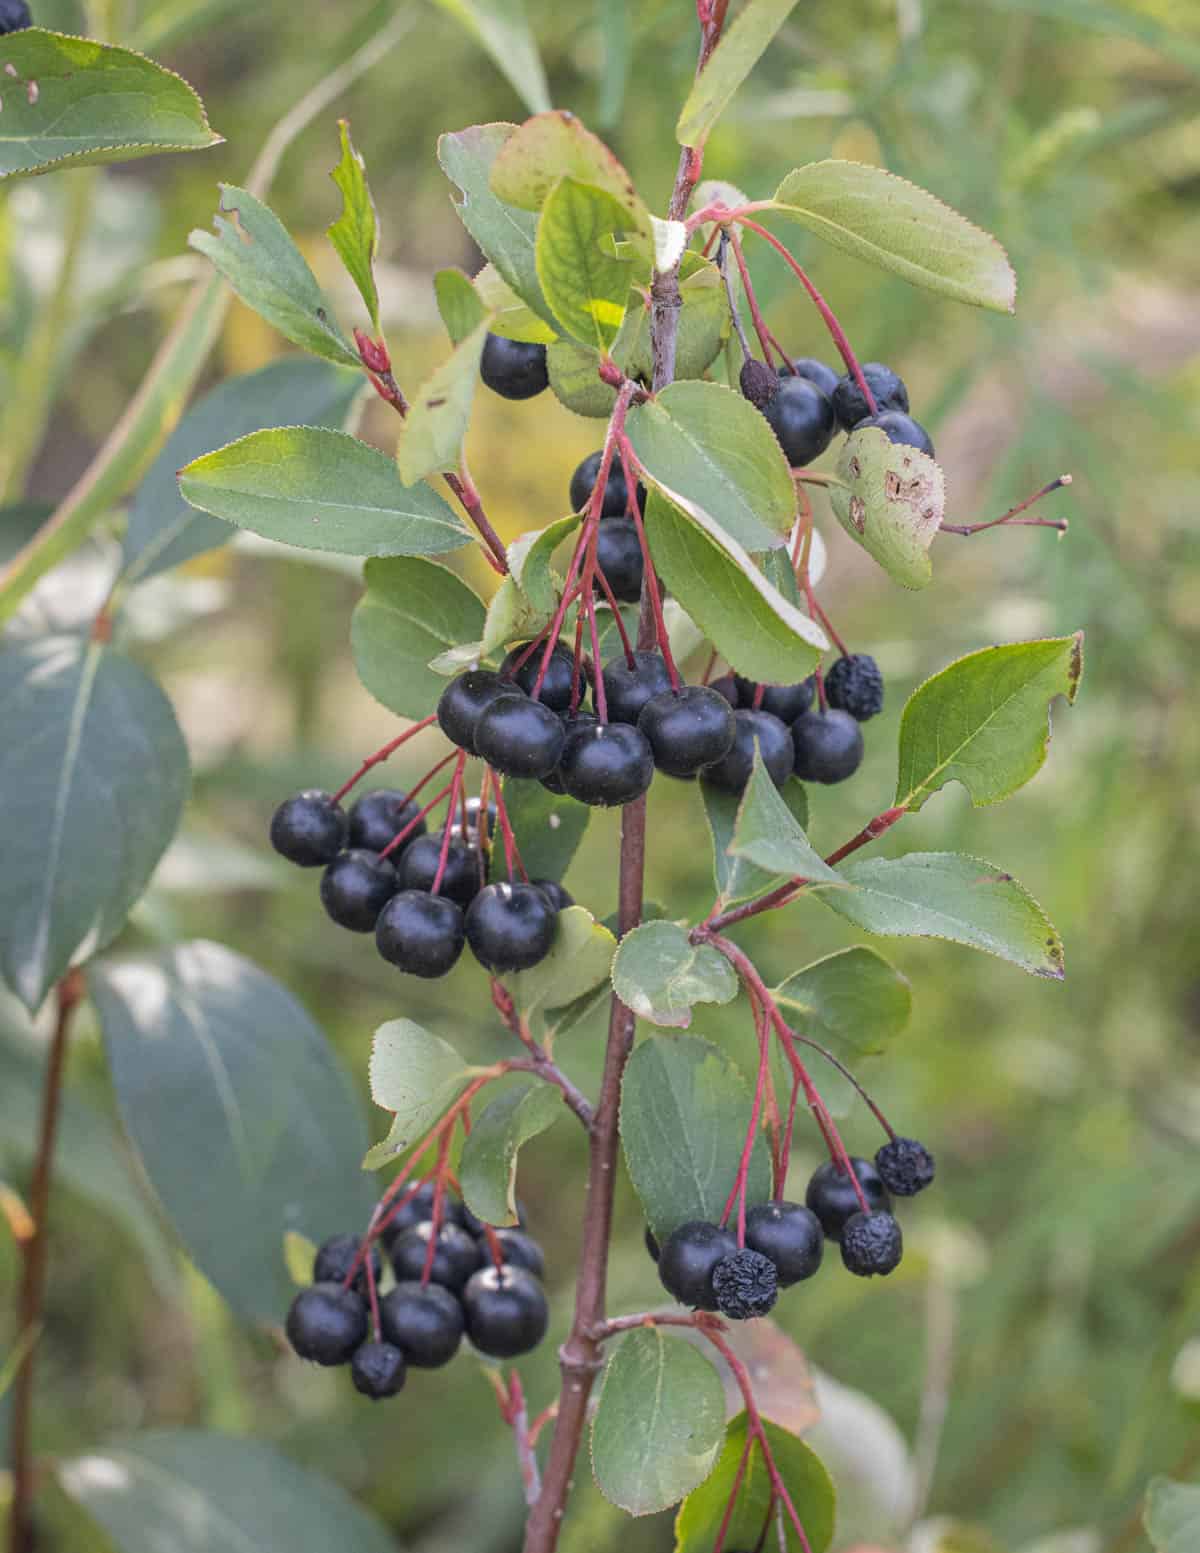 Ripe black chokeberries on the branch in the summer (Aronia melanocarpa).